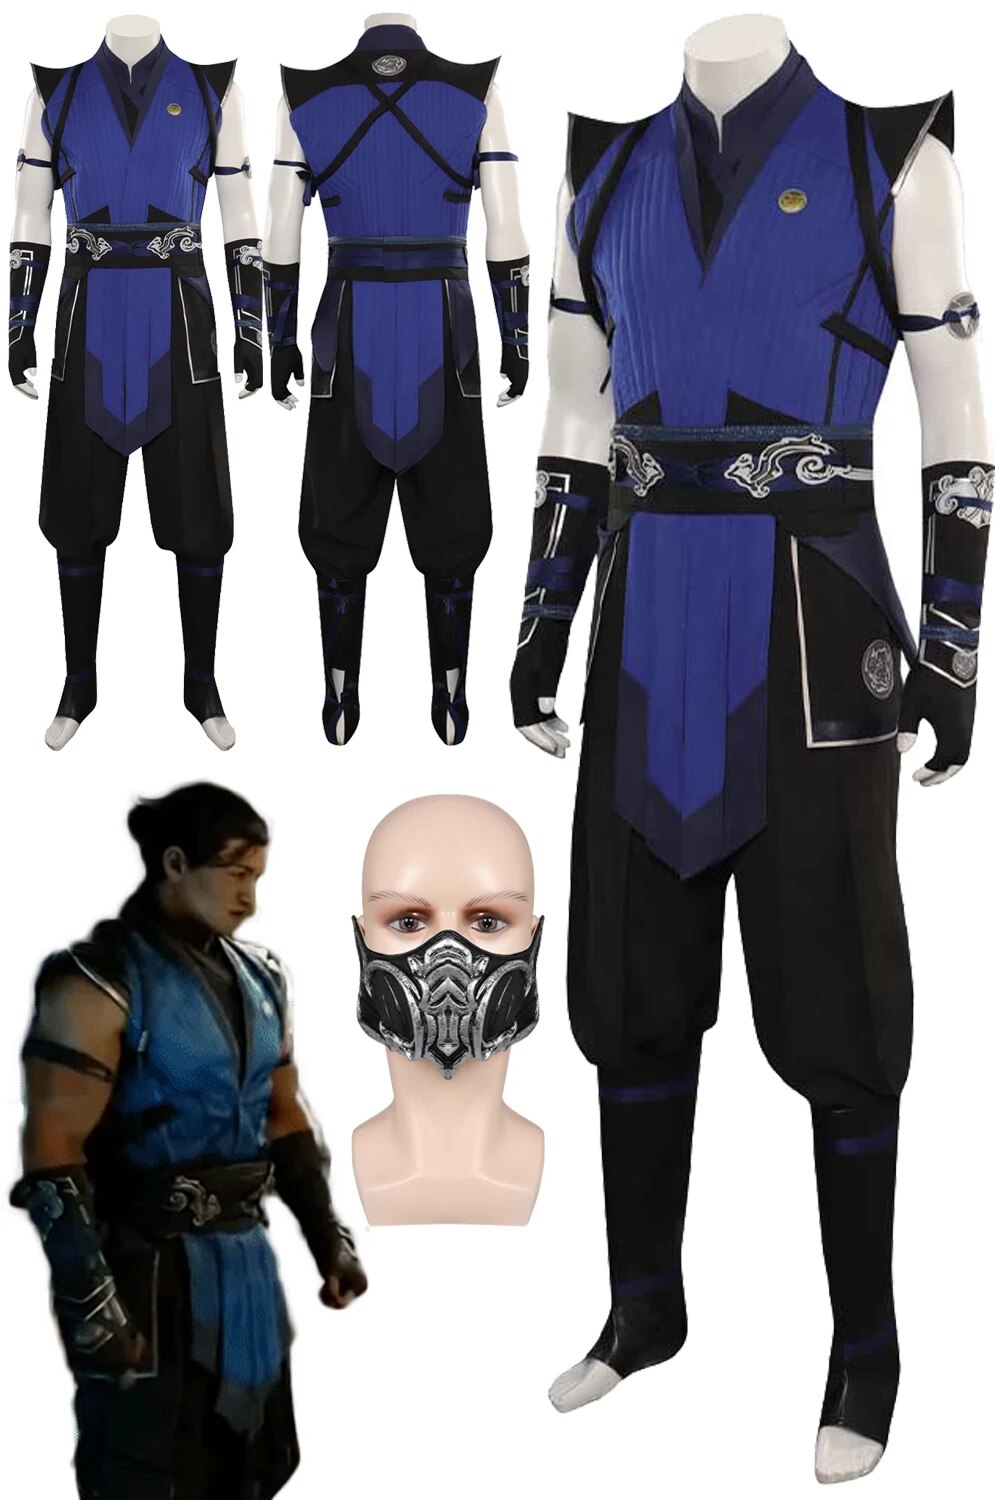 Top Selling Item Sub Zero Cosplay Role Play Anime Game Mortal Kombat